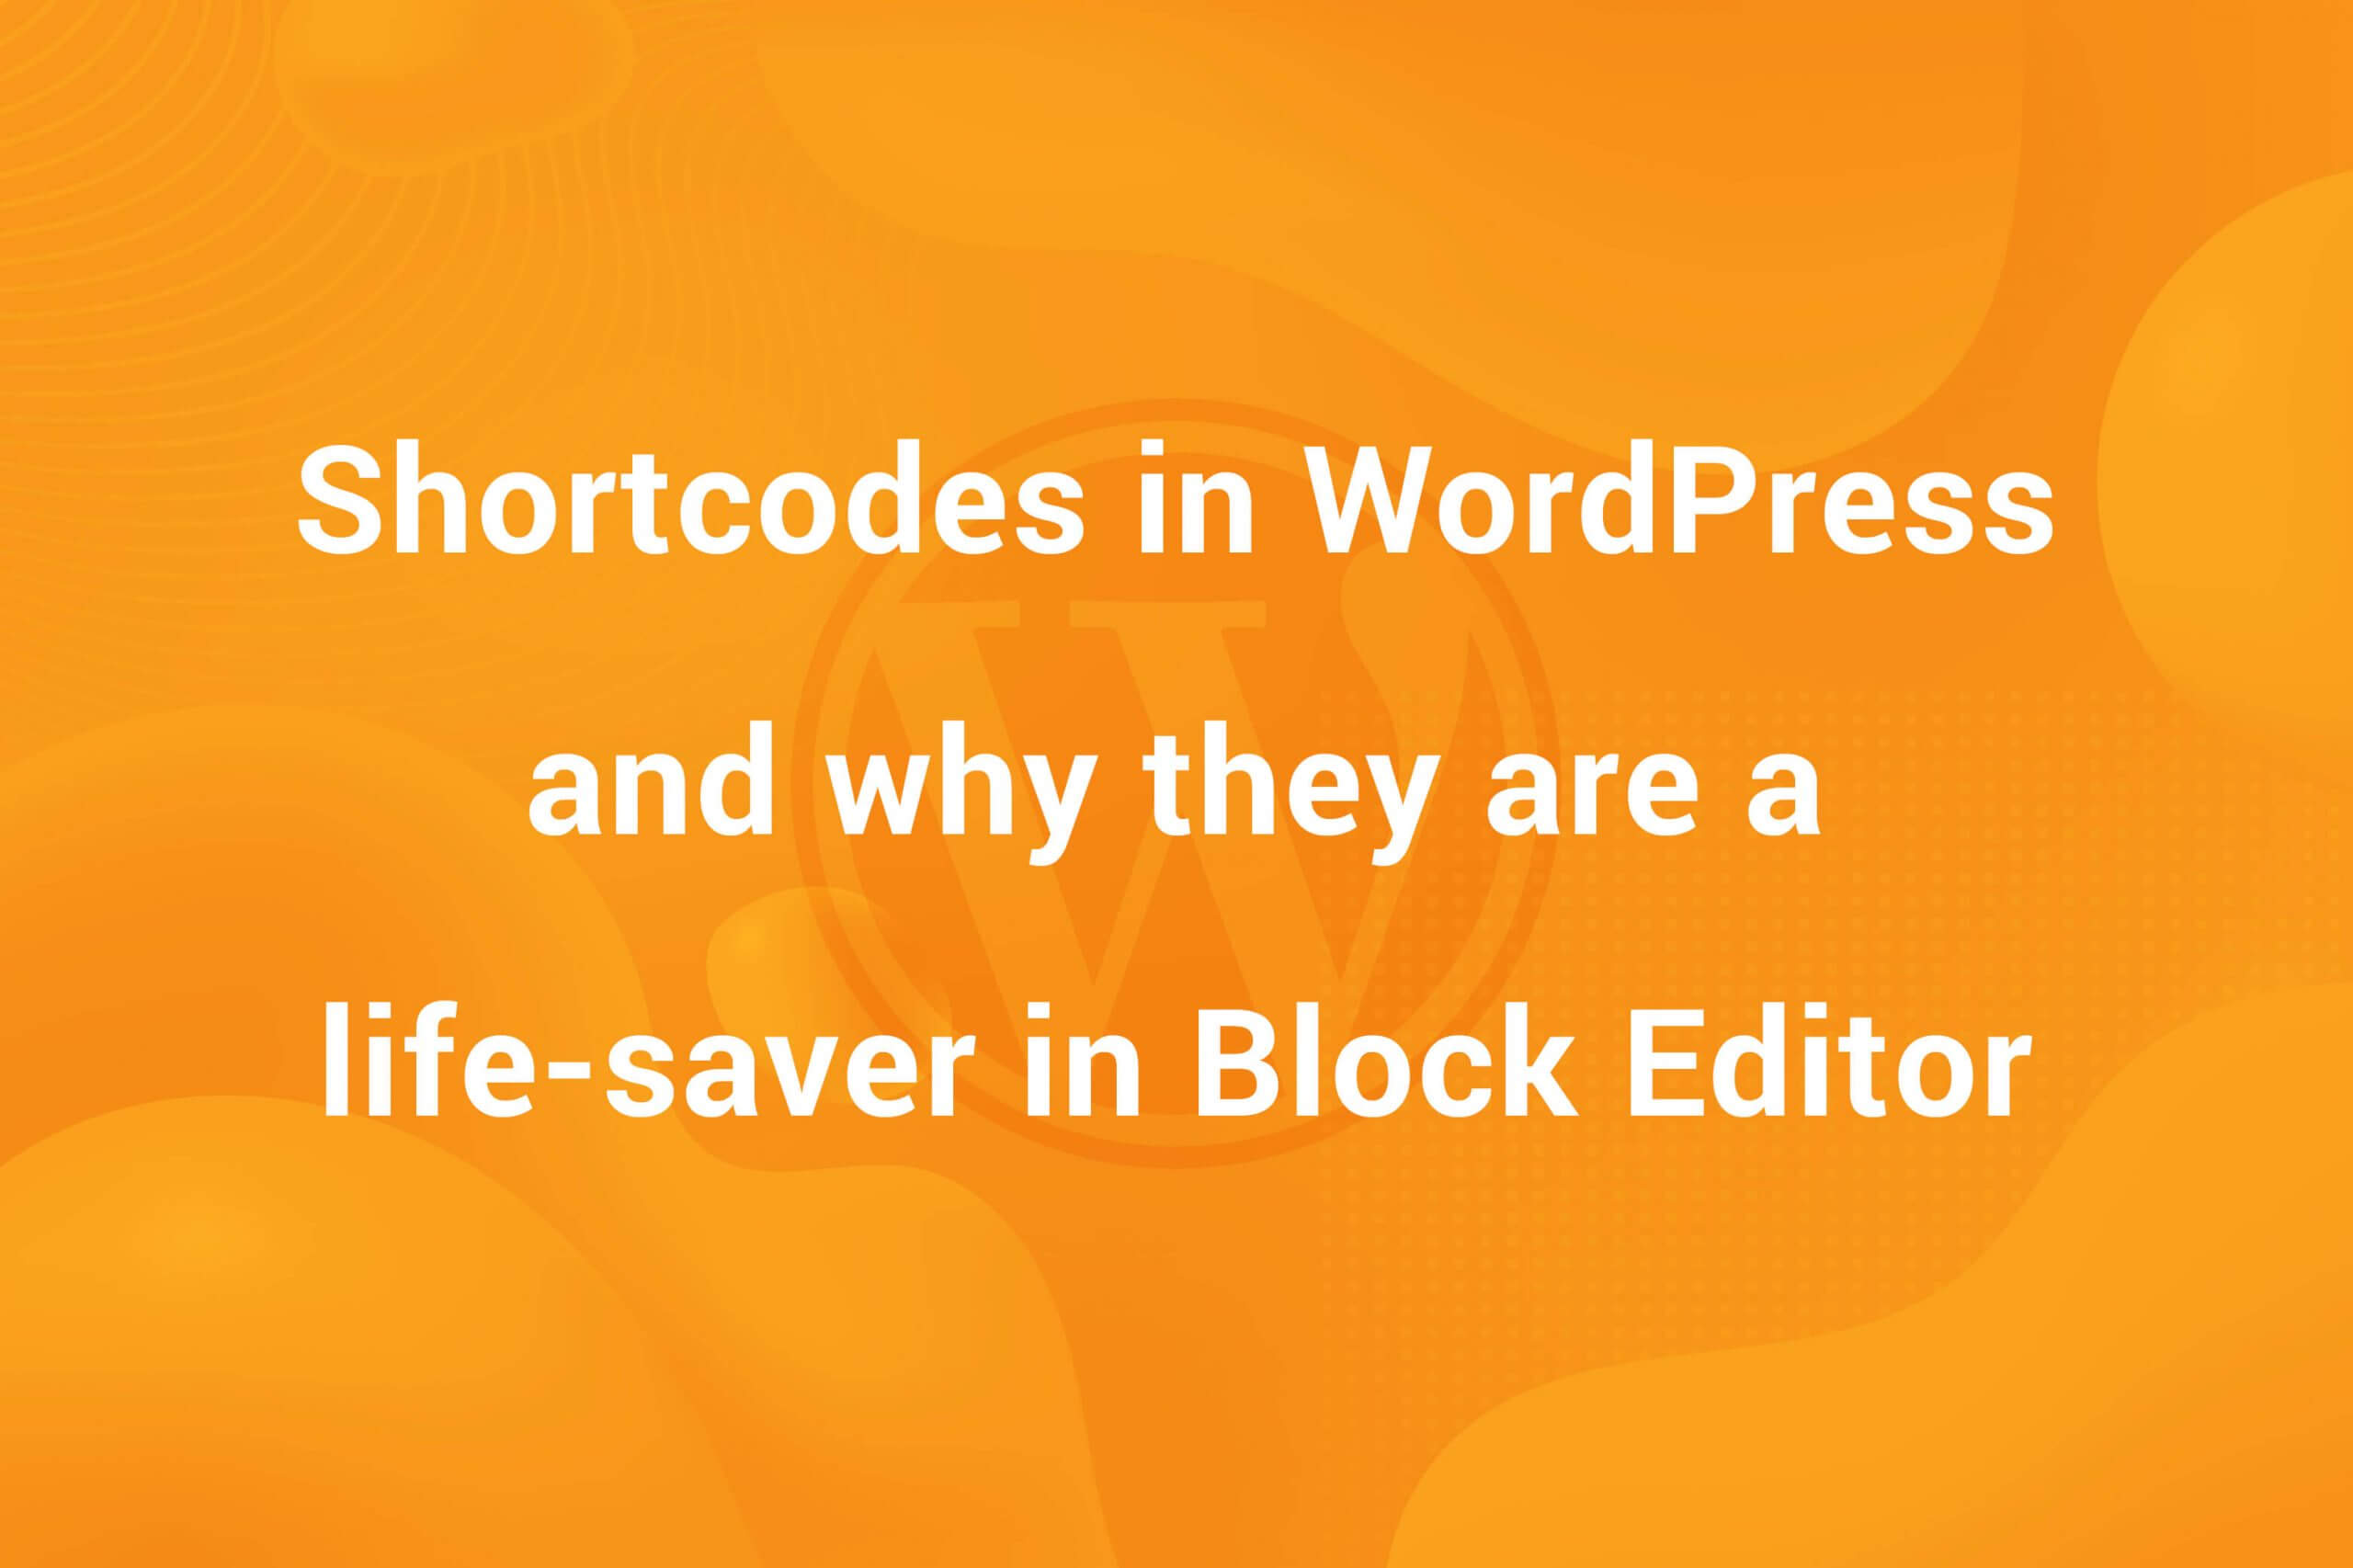 Shortcodes in WordPress and why they are a life-saver with the Block Editor